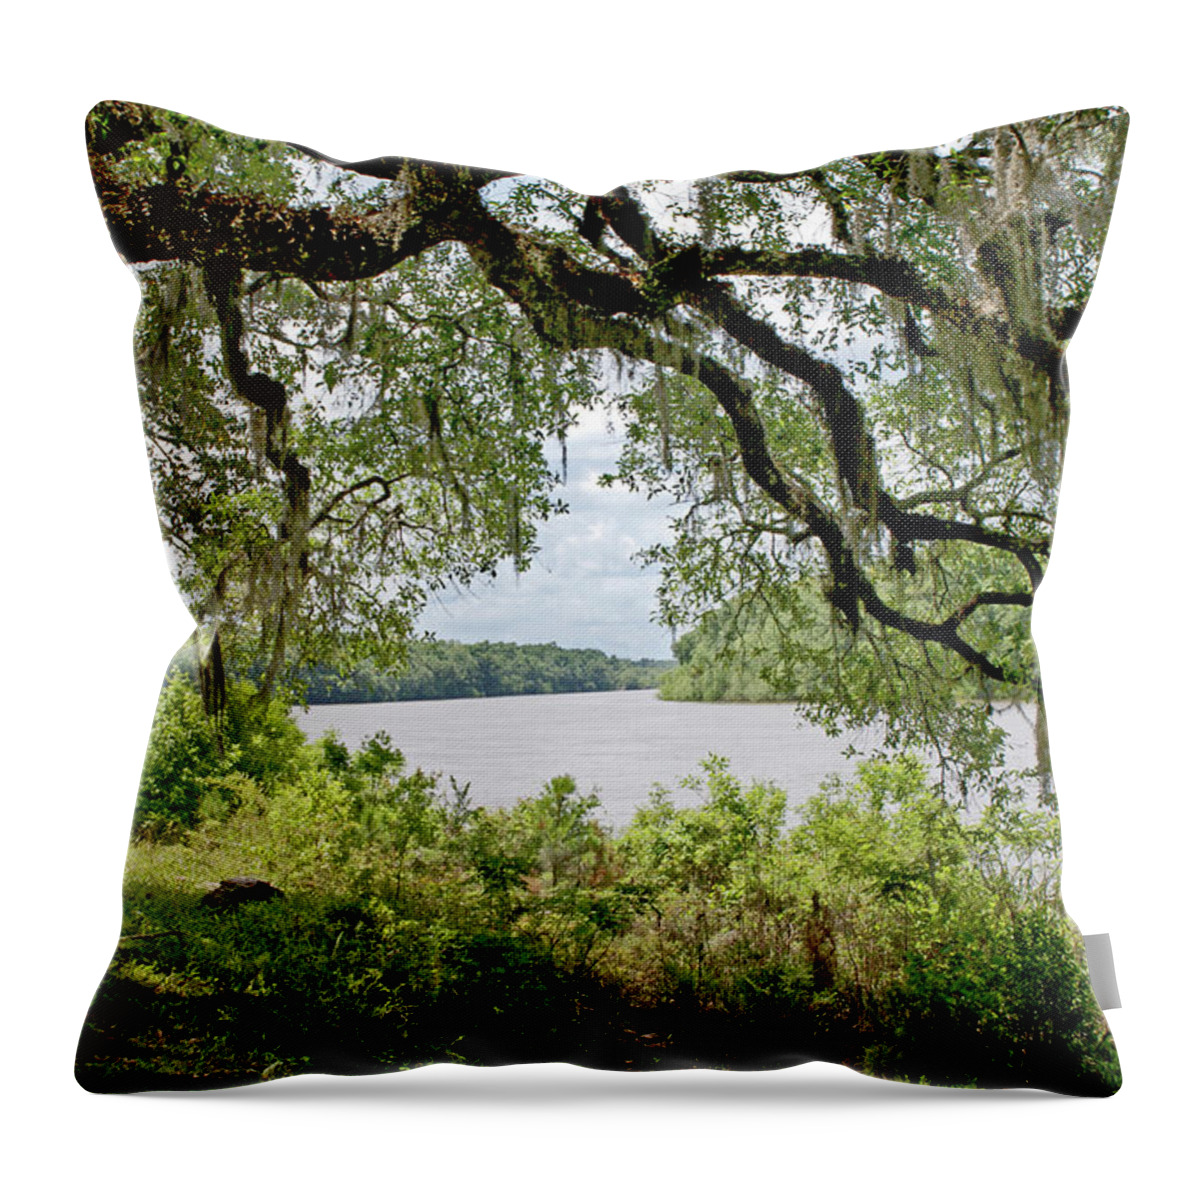 Apalachicola Throw Pillow featuring the photograph Apalachicola River by Paul Mashburn